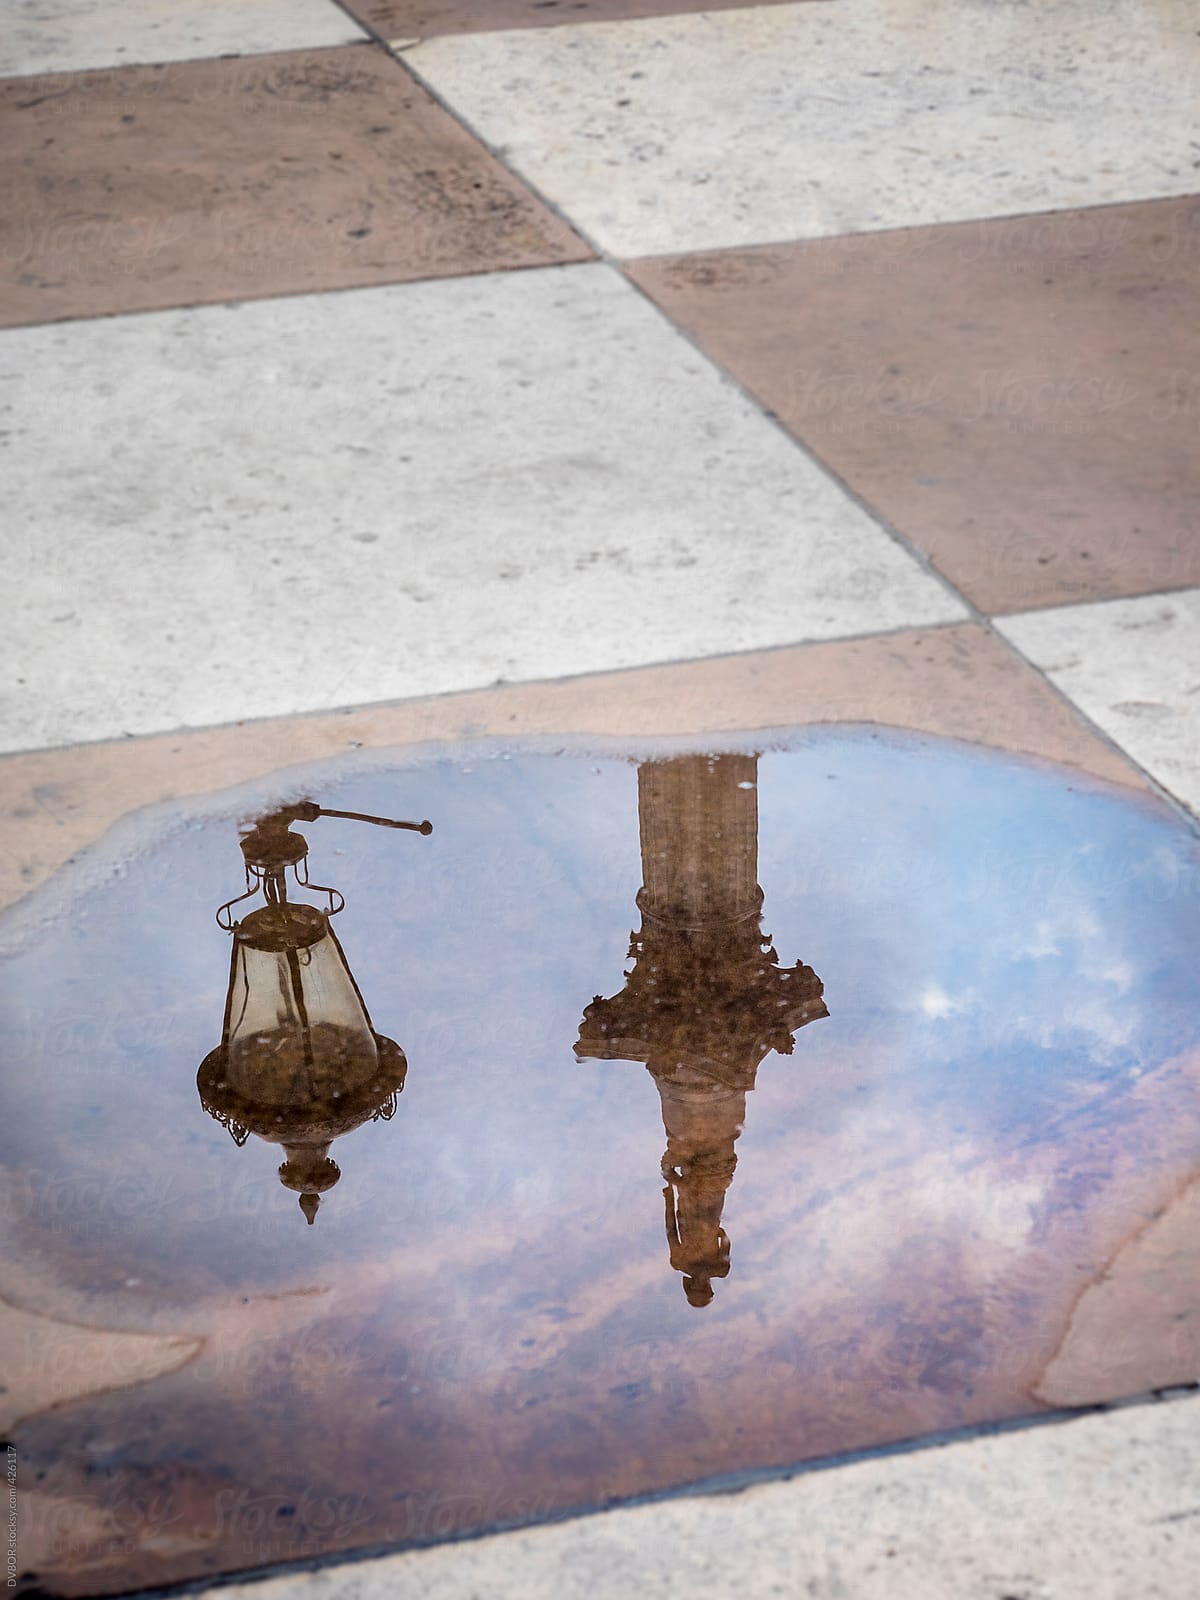 Nelson's Column in Trafalgar square, London, England reflected in a puddle